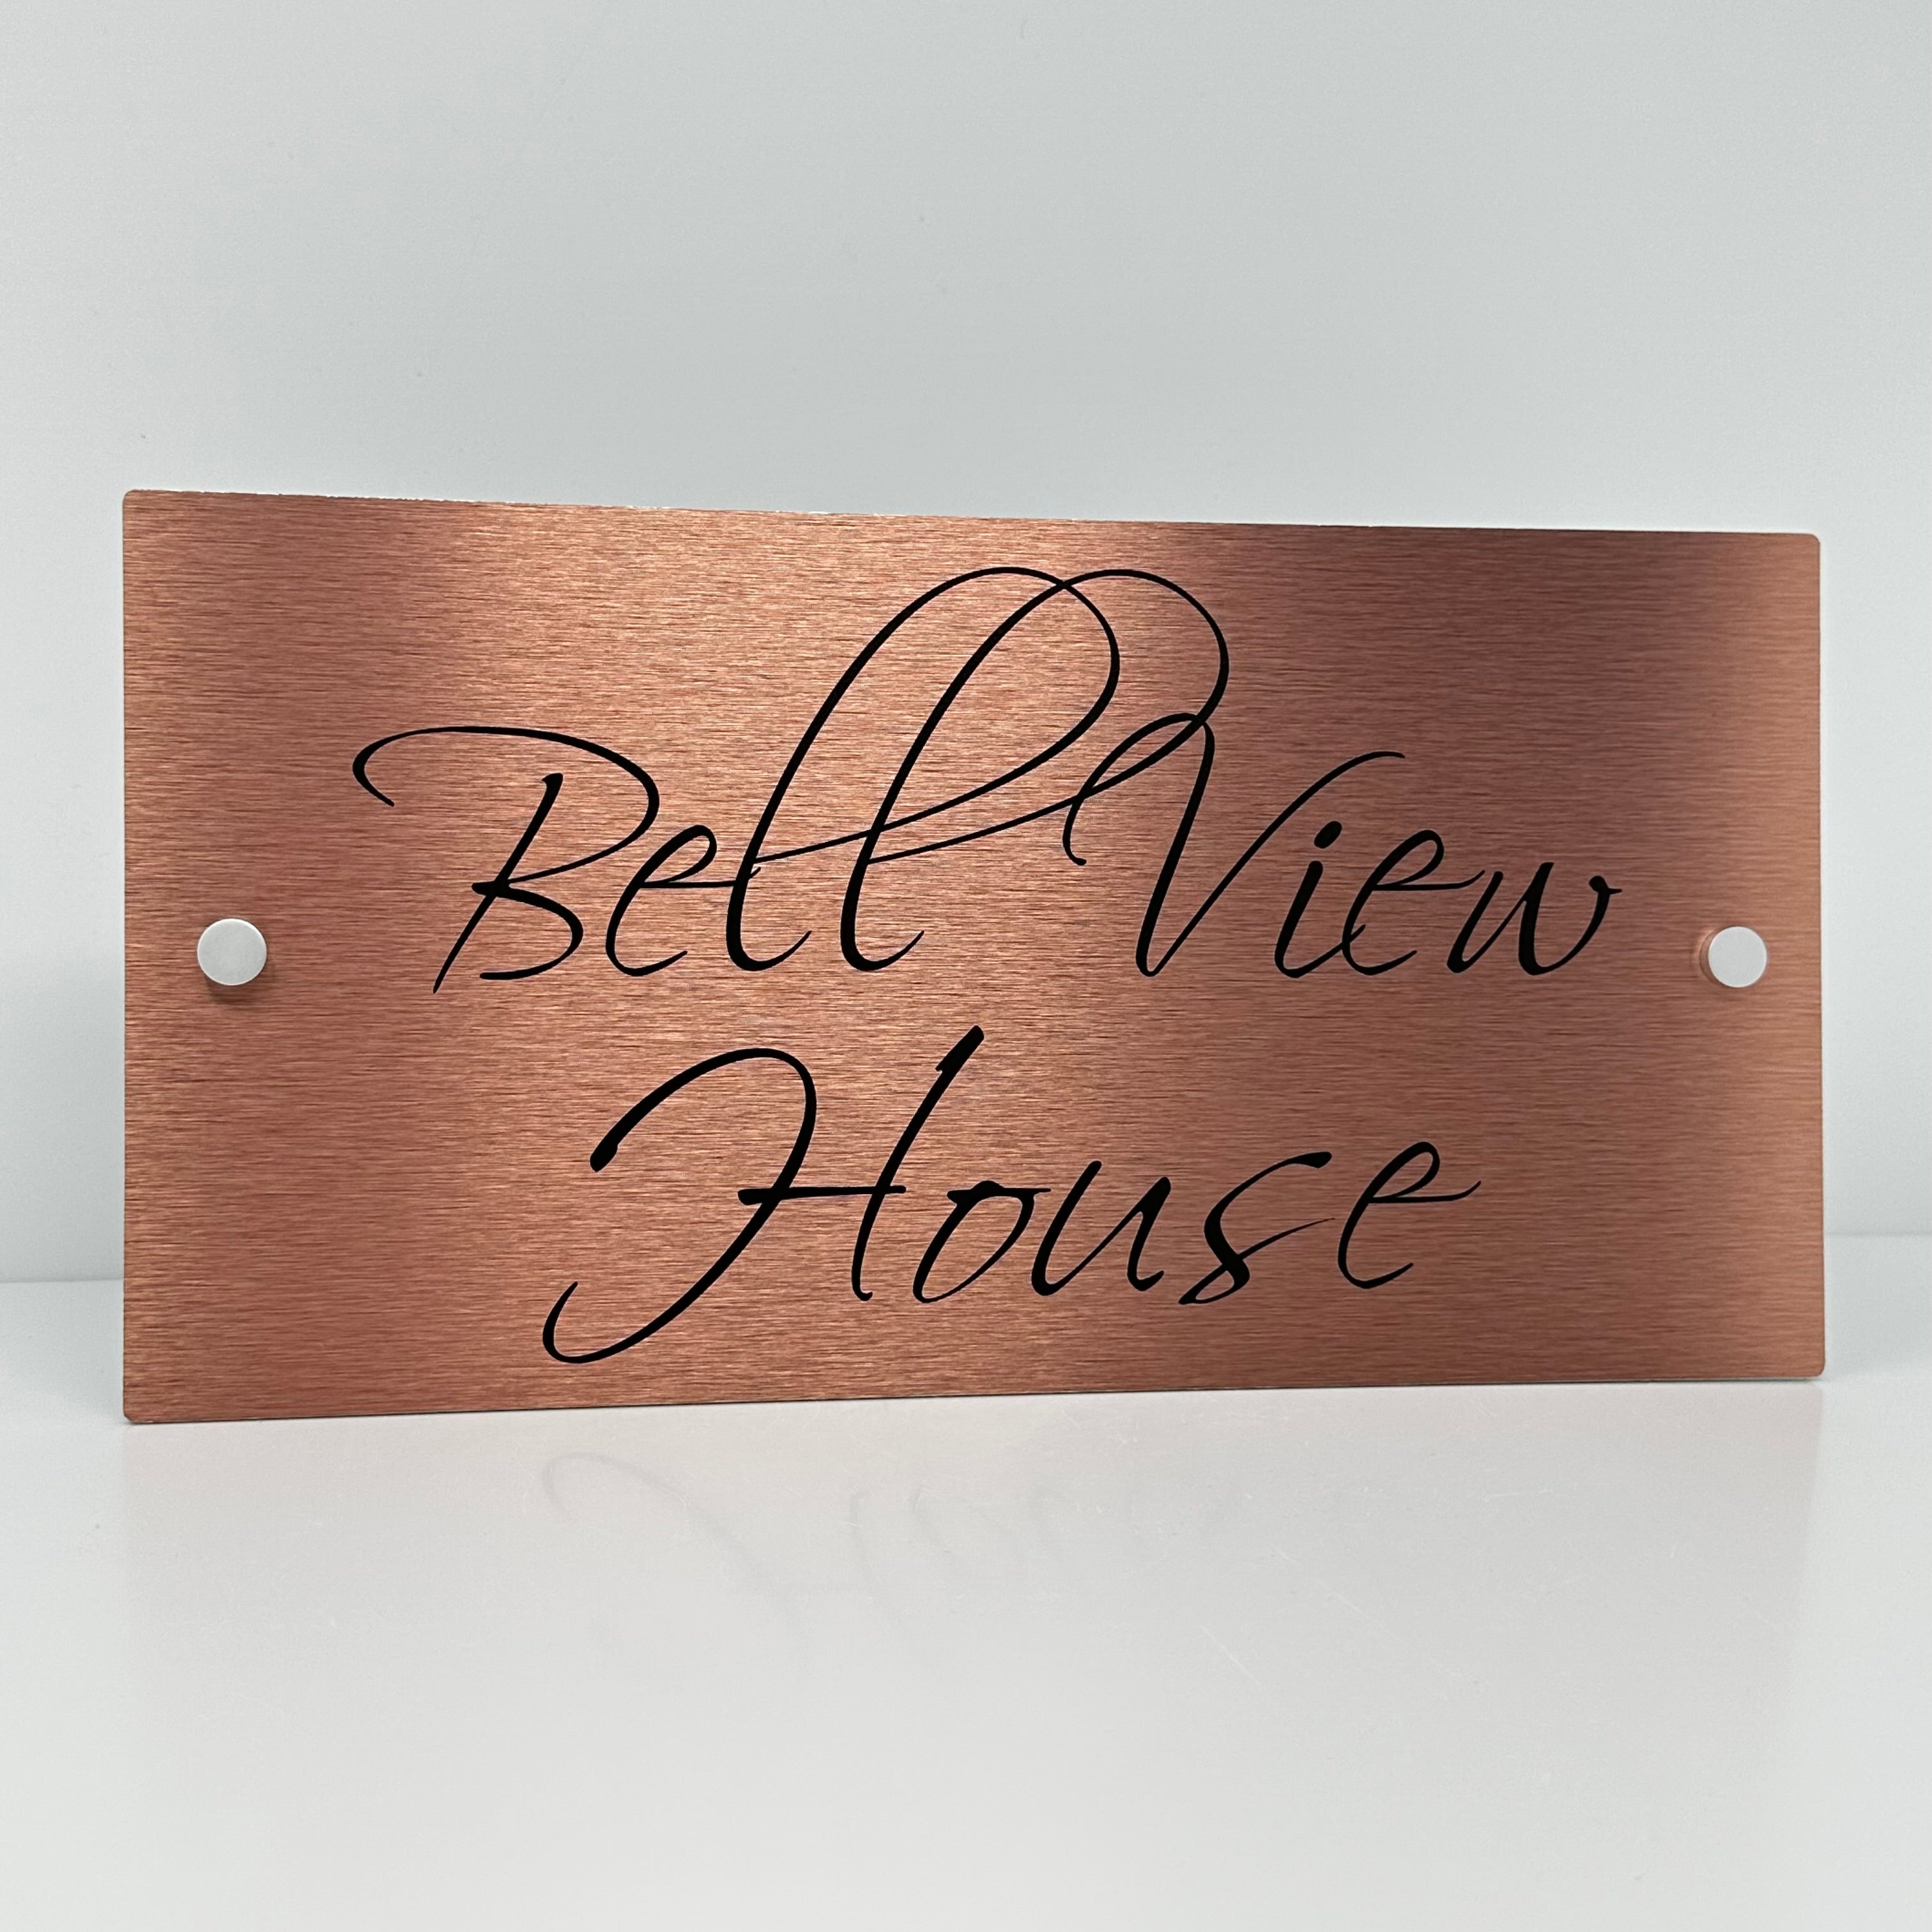 The Bell View Modern House Sign with a Brushed Copper Panel and Satin Silver Stand Off Fixings ( Size - 35cm x 18cm )